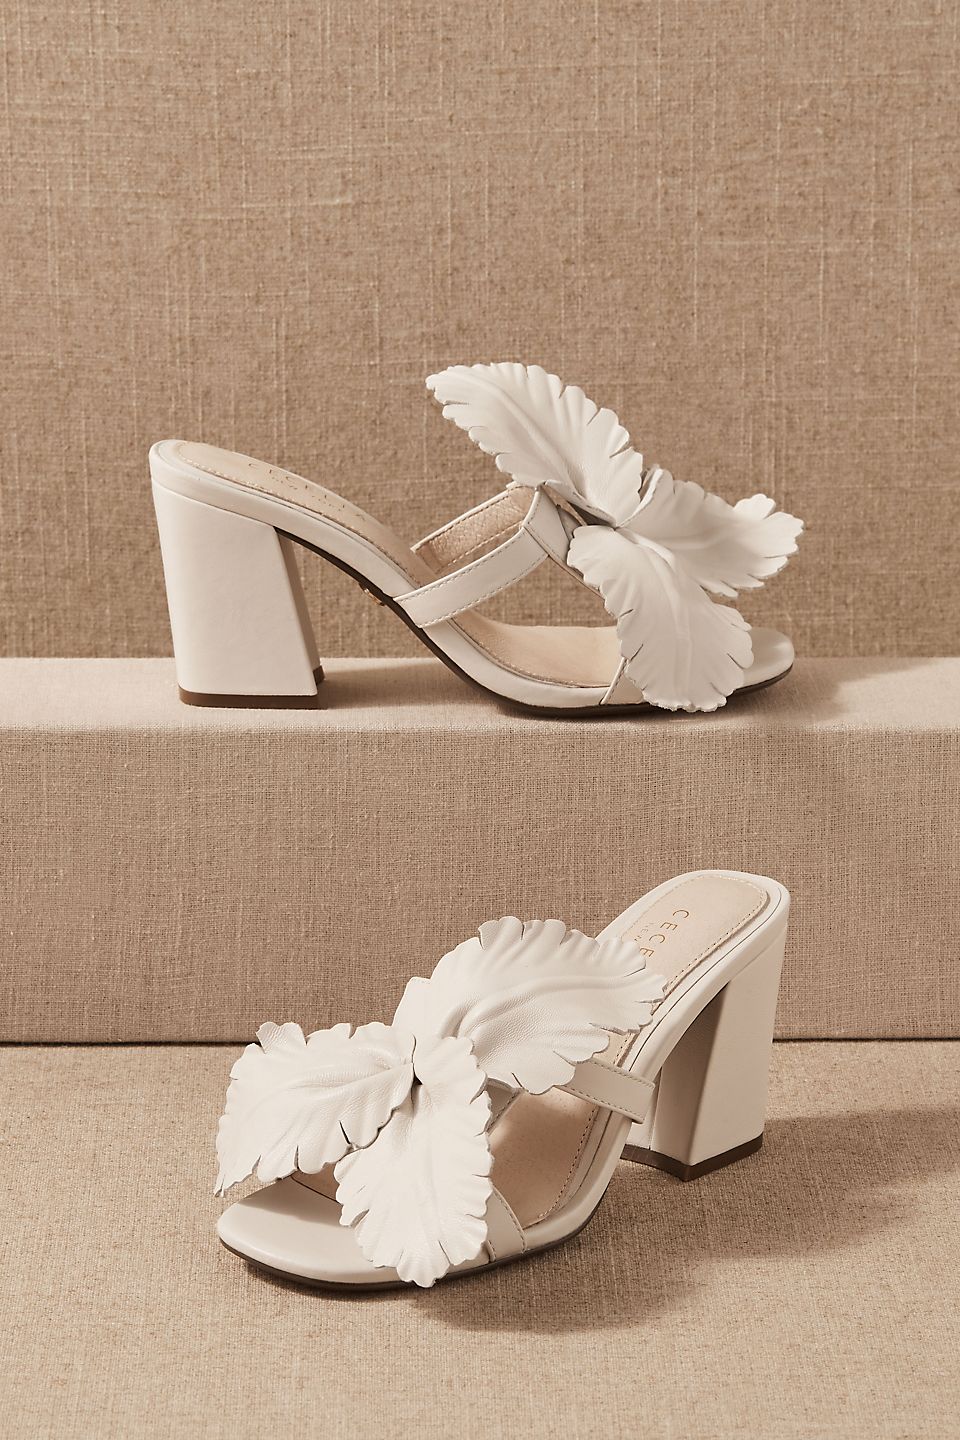 tropical wedding shoes